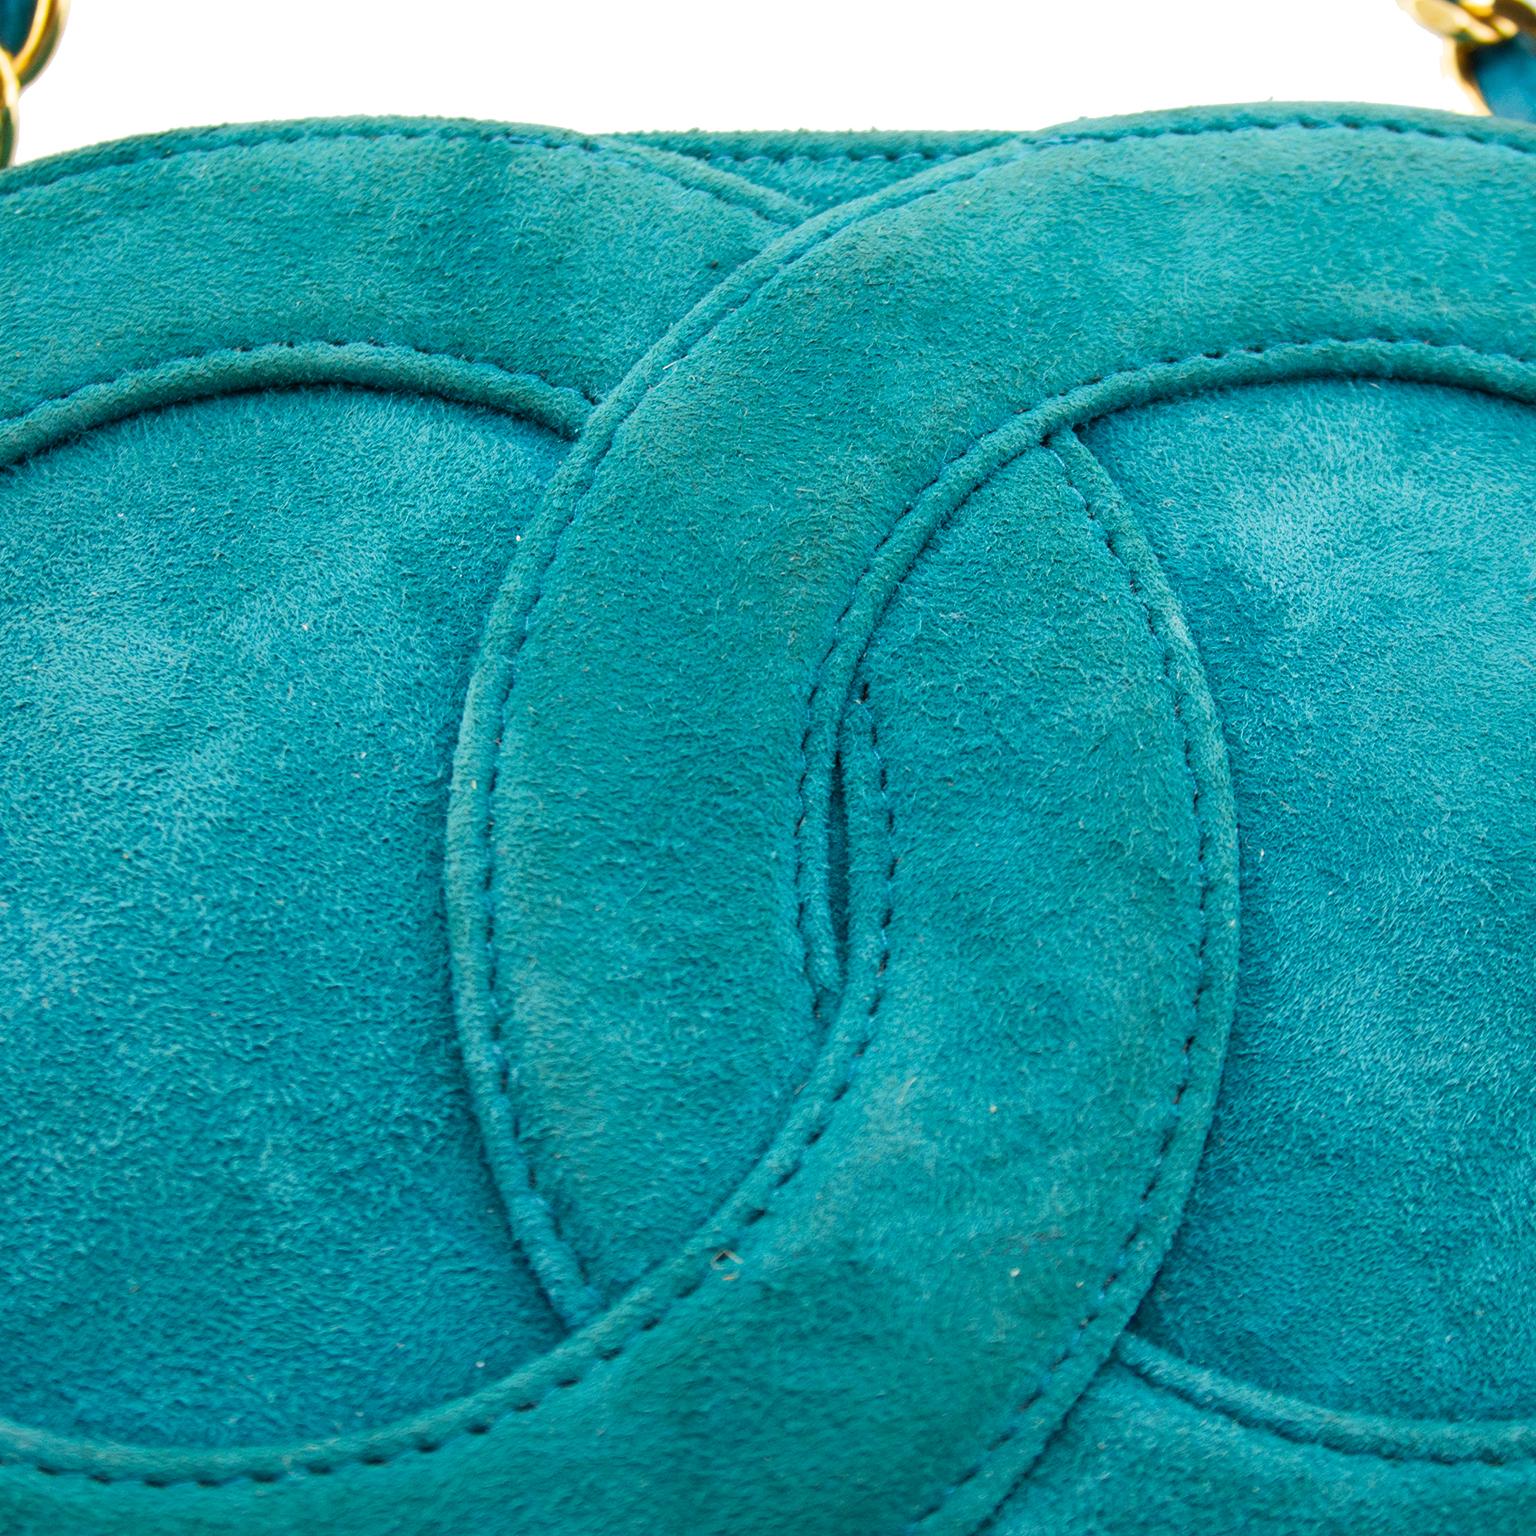 Blue 1990s Chanel Teal Suede Mini Bag with Tassel 